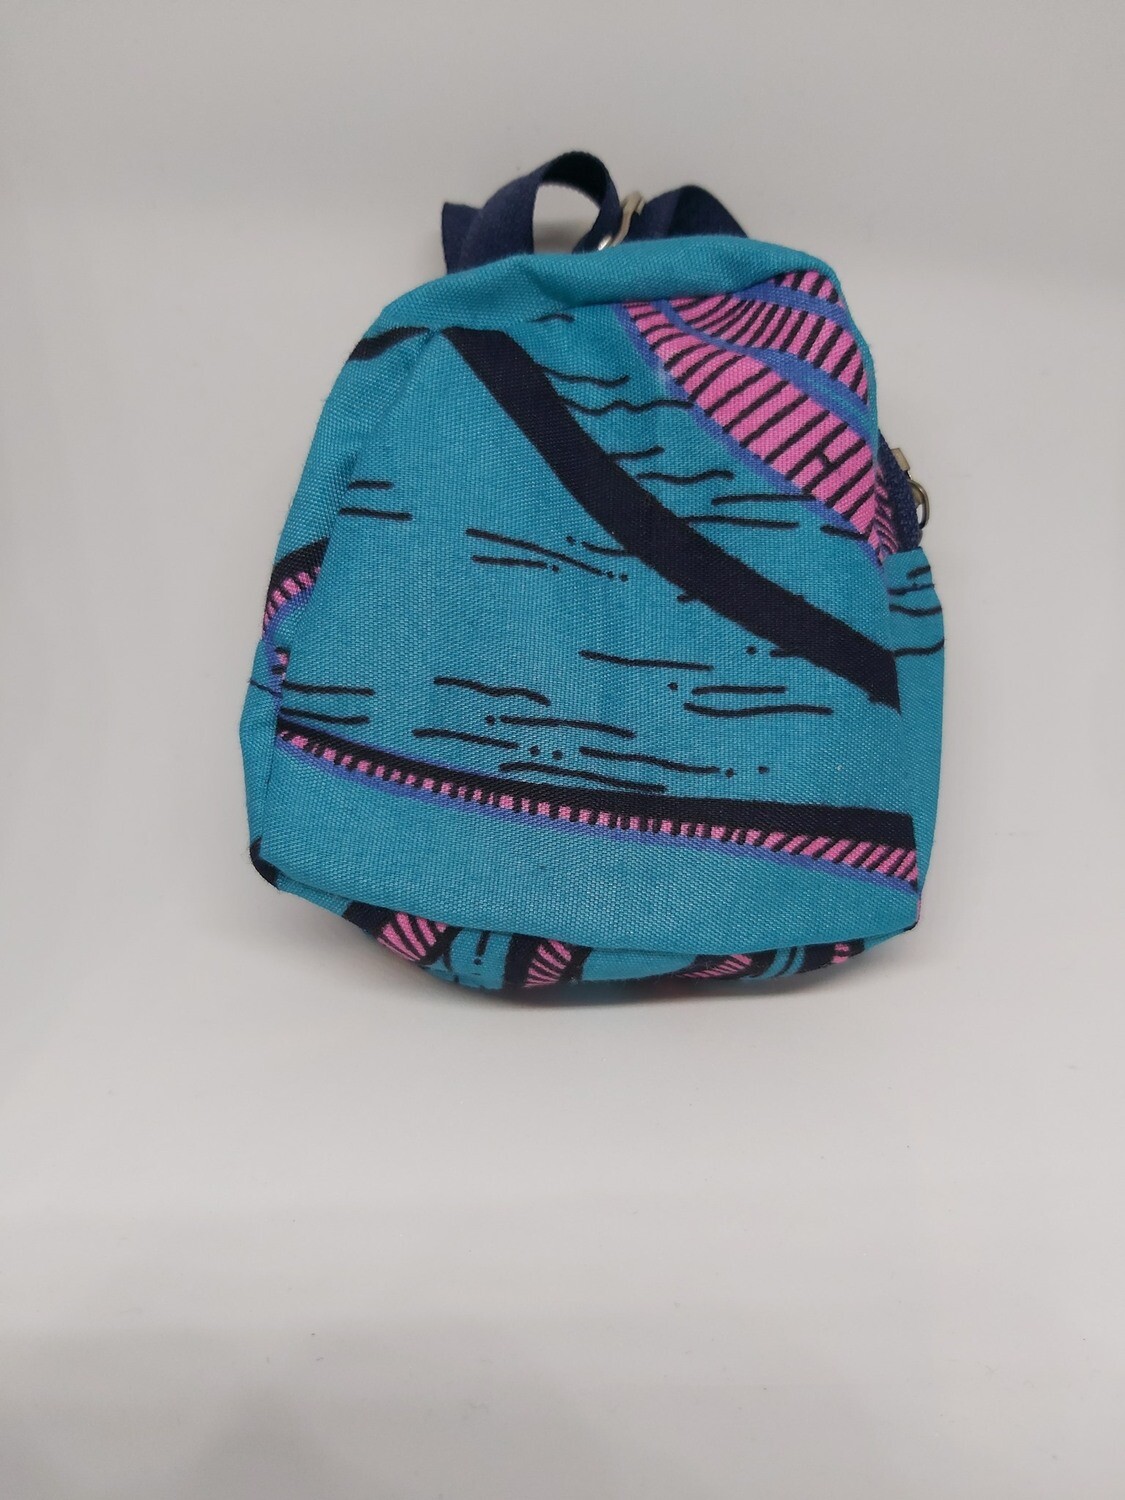 BLUE MULTICOLORED BACKPACK KEYCHAIN